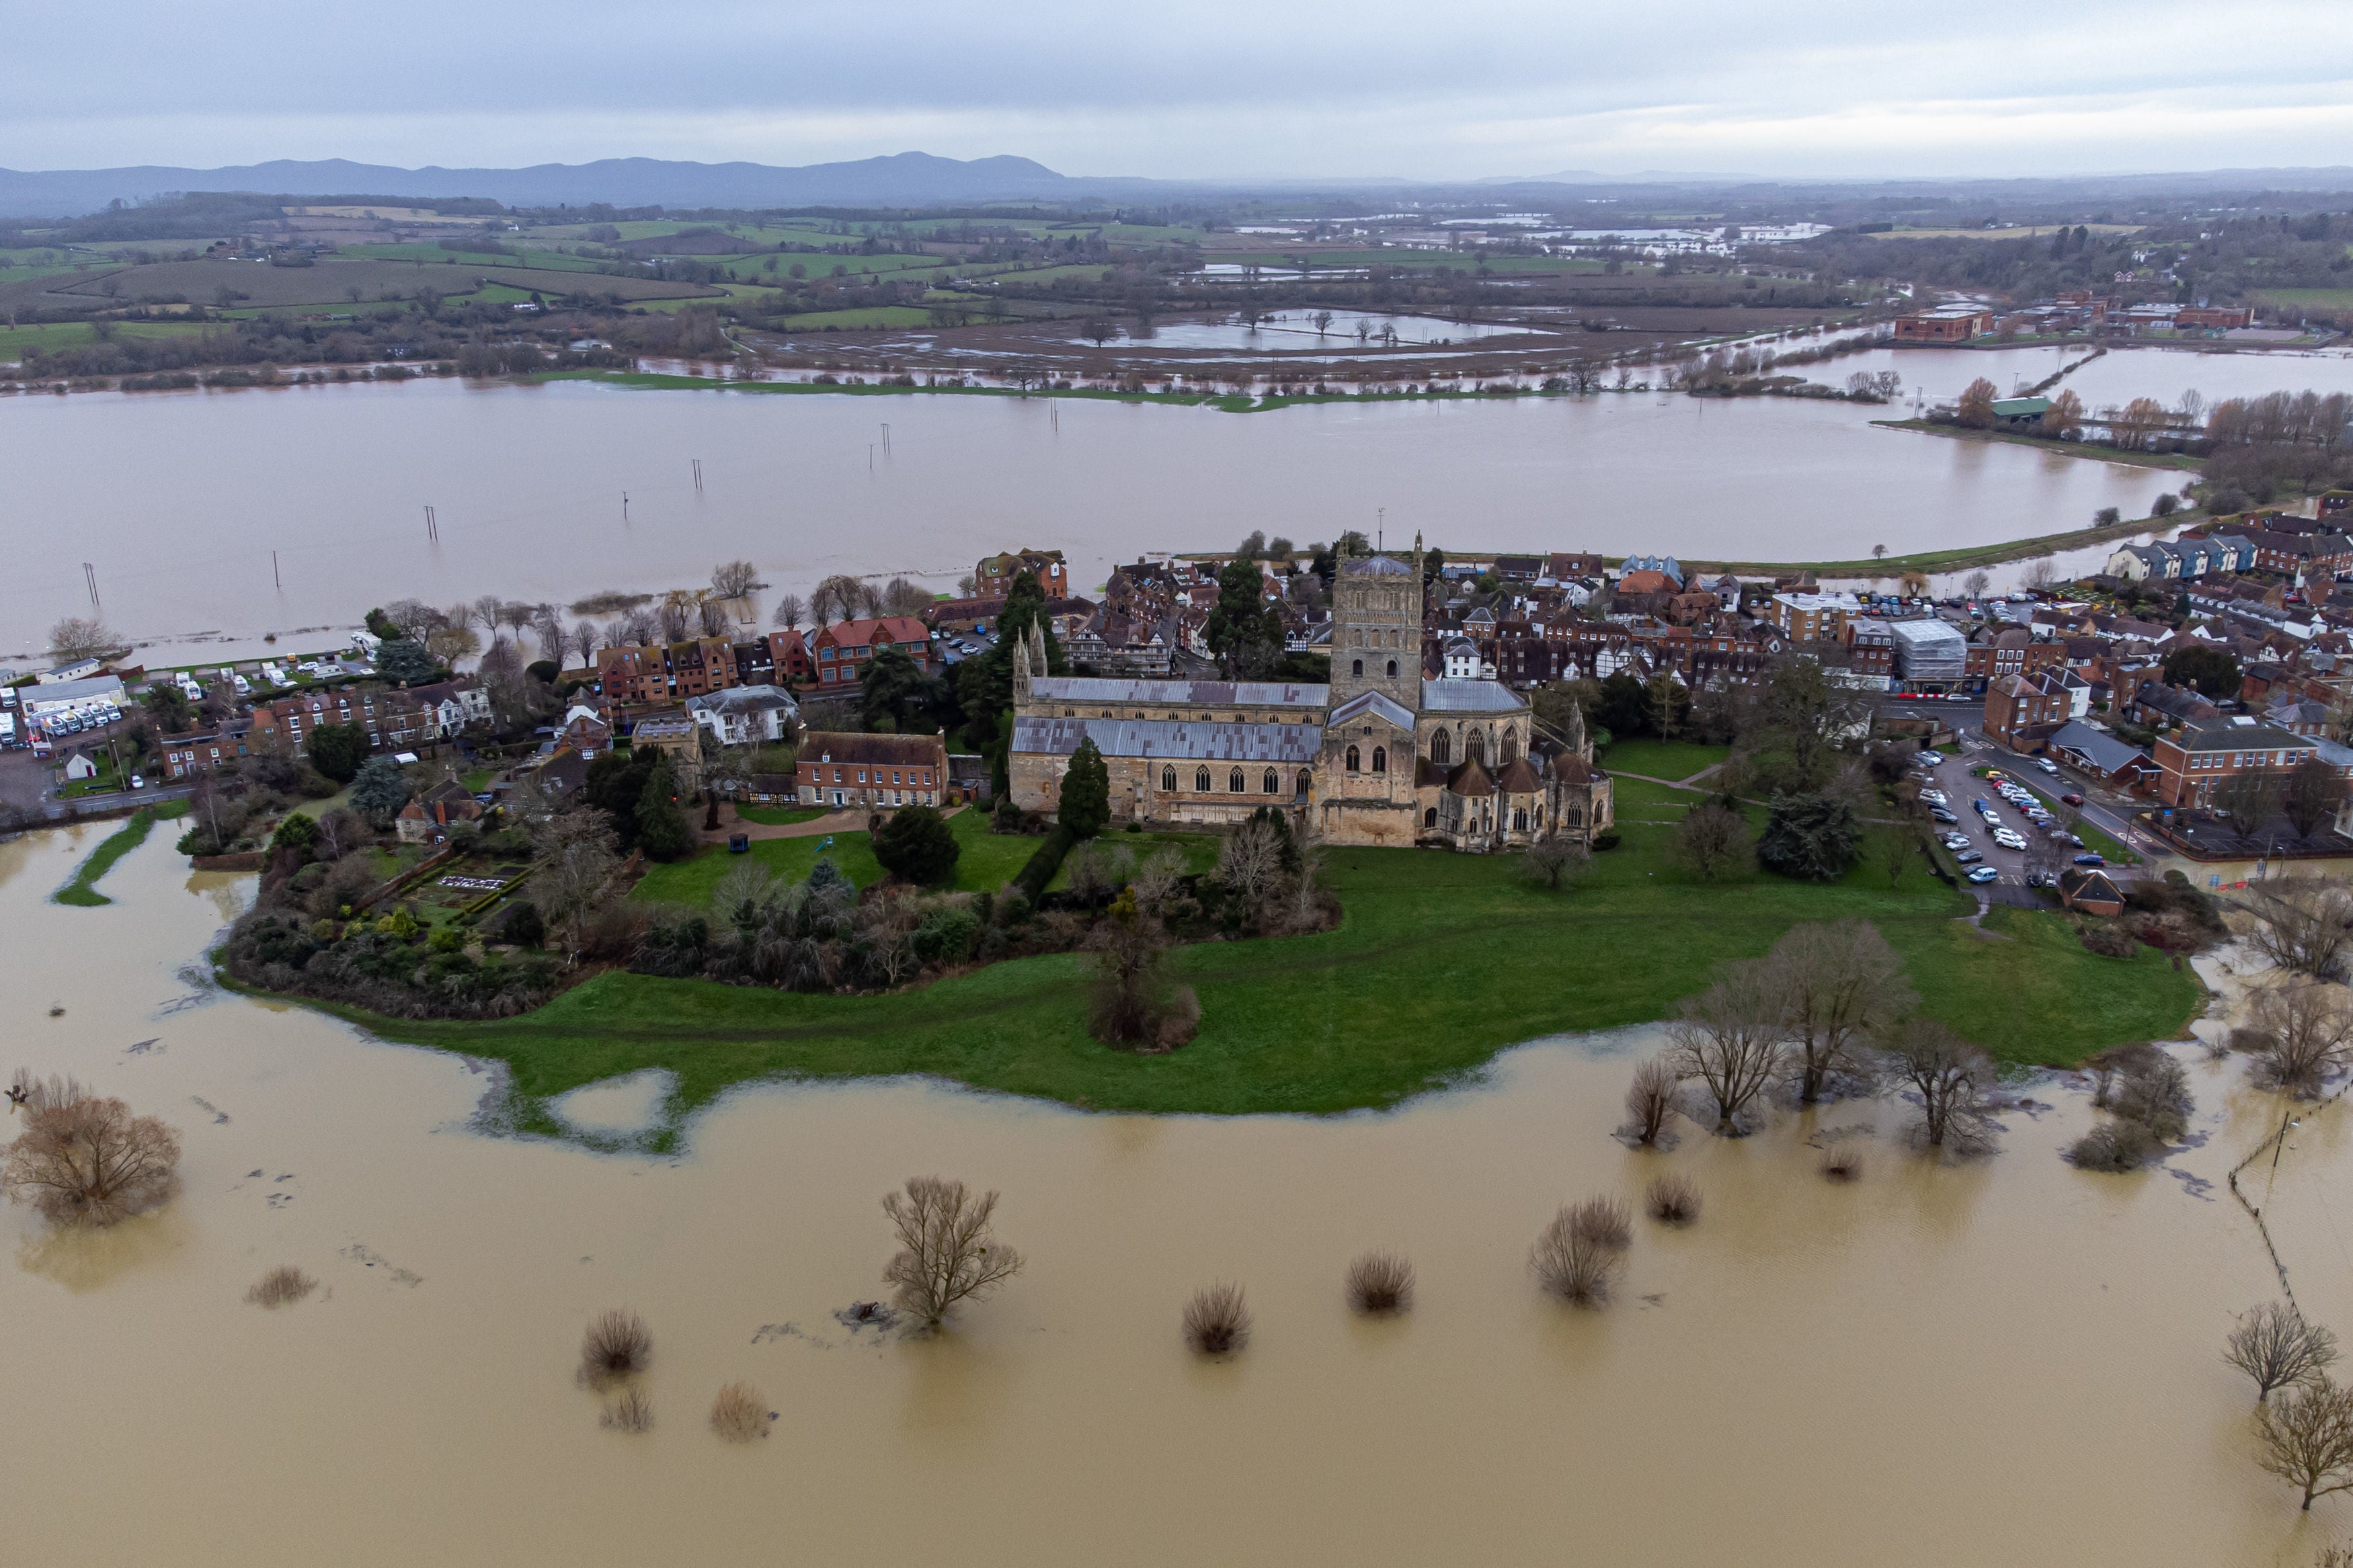 Flooding around Tewkesbury Abbey after heavy rain from Storm Gerrit